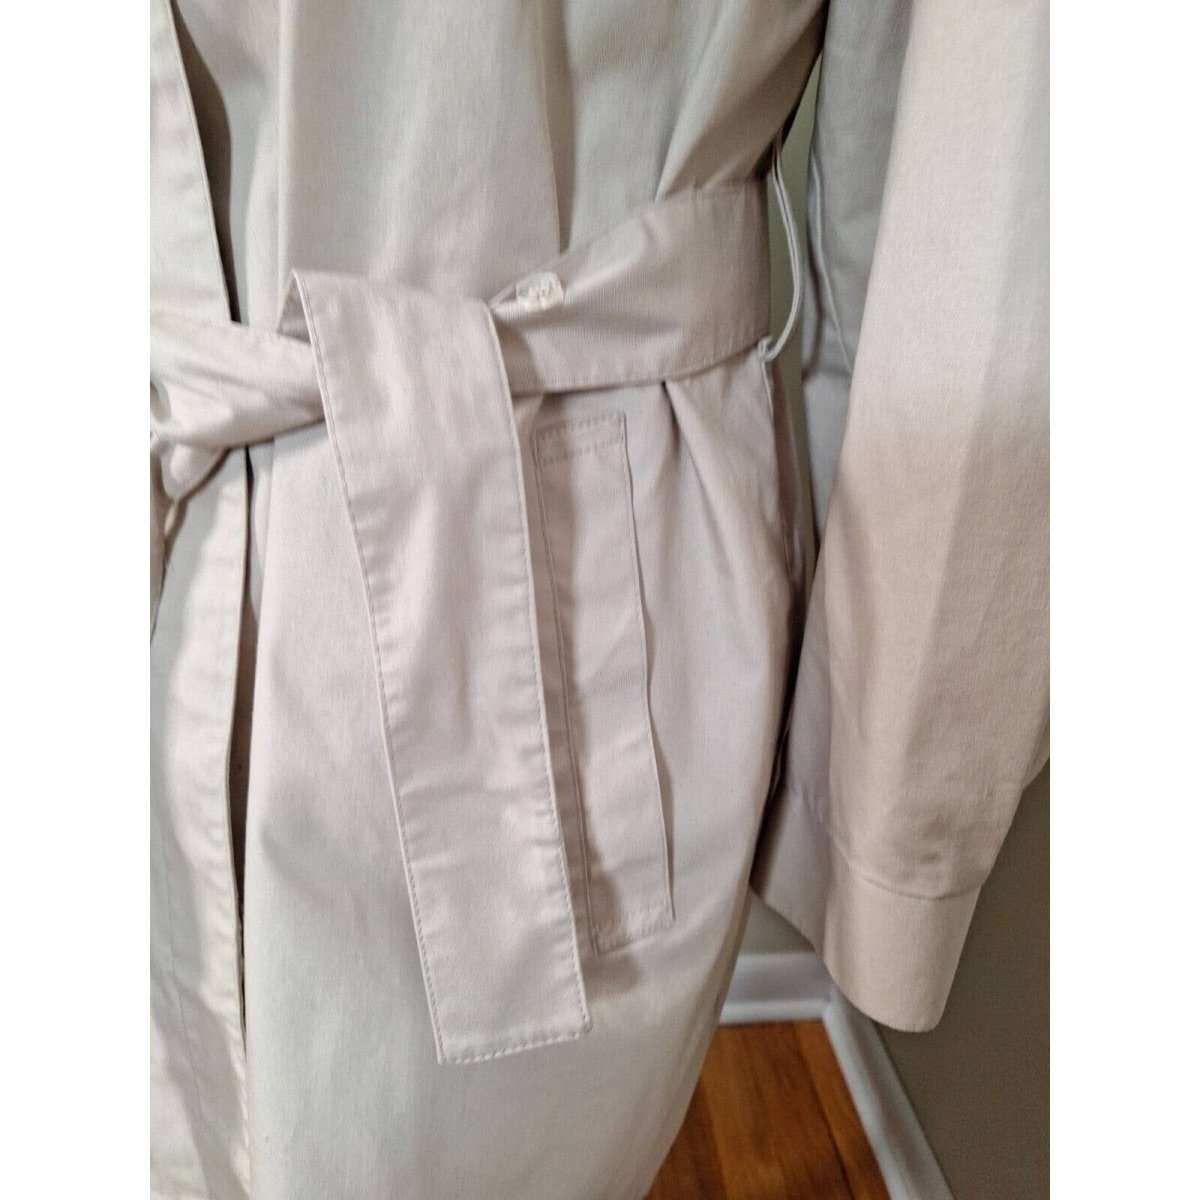 Vintage 80s Lightweight Puff Sleeve Trench Coat Women's Size 12 - themallvintage The Mall Vintage